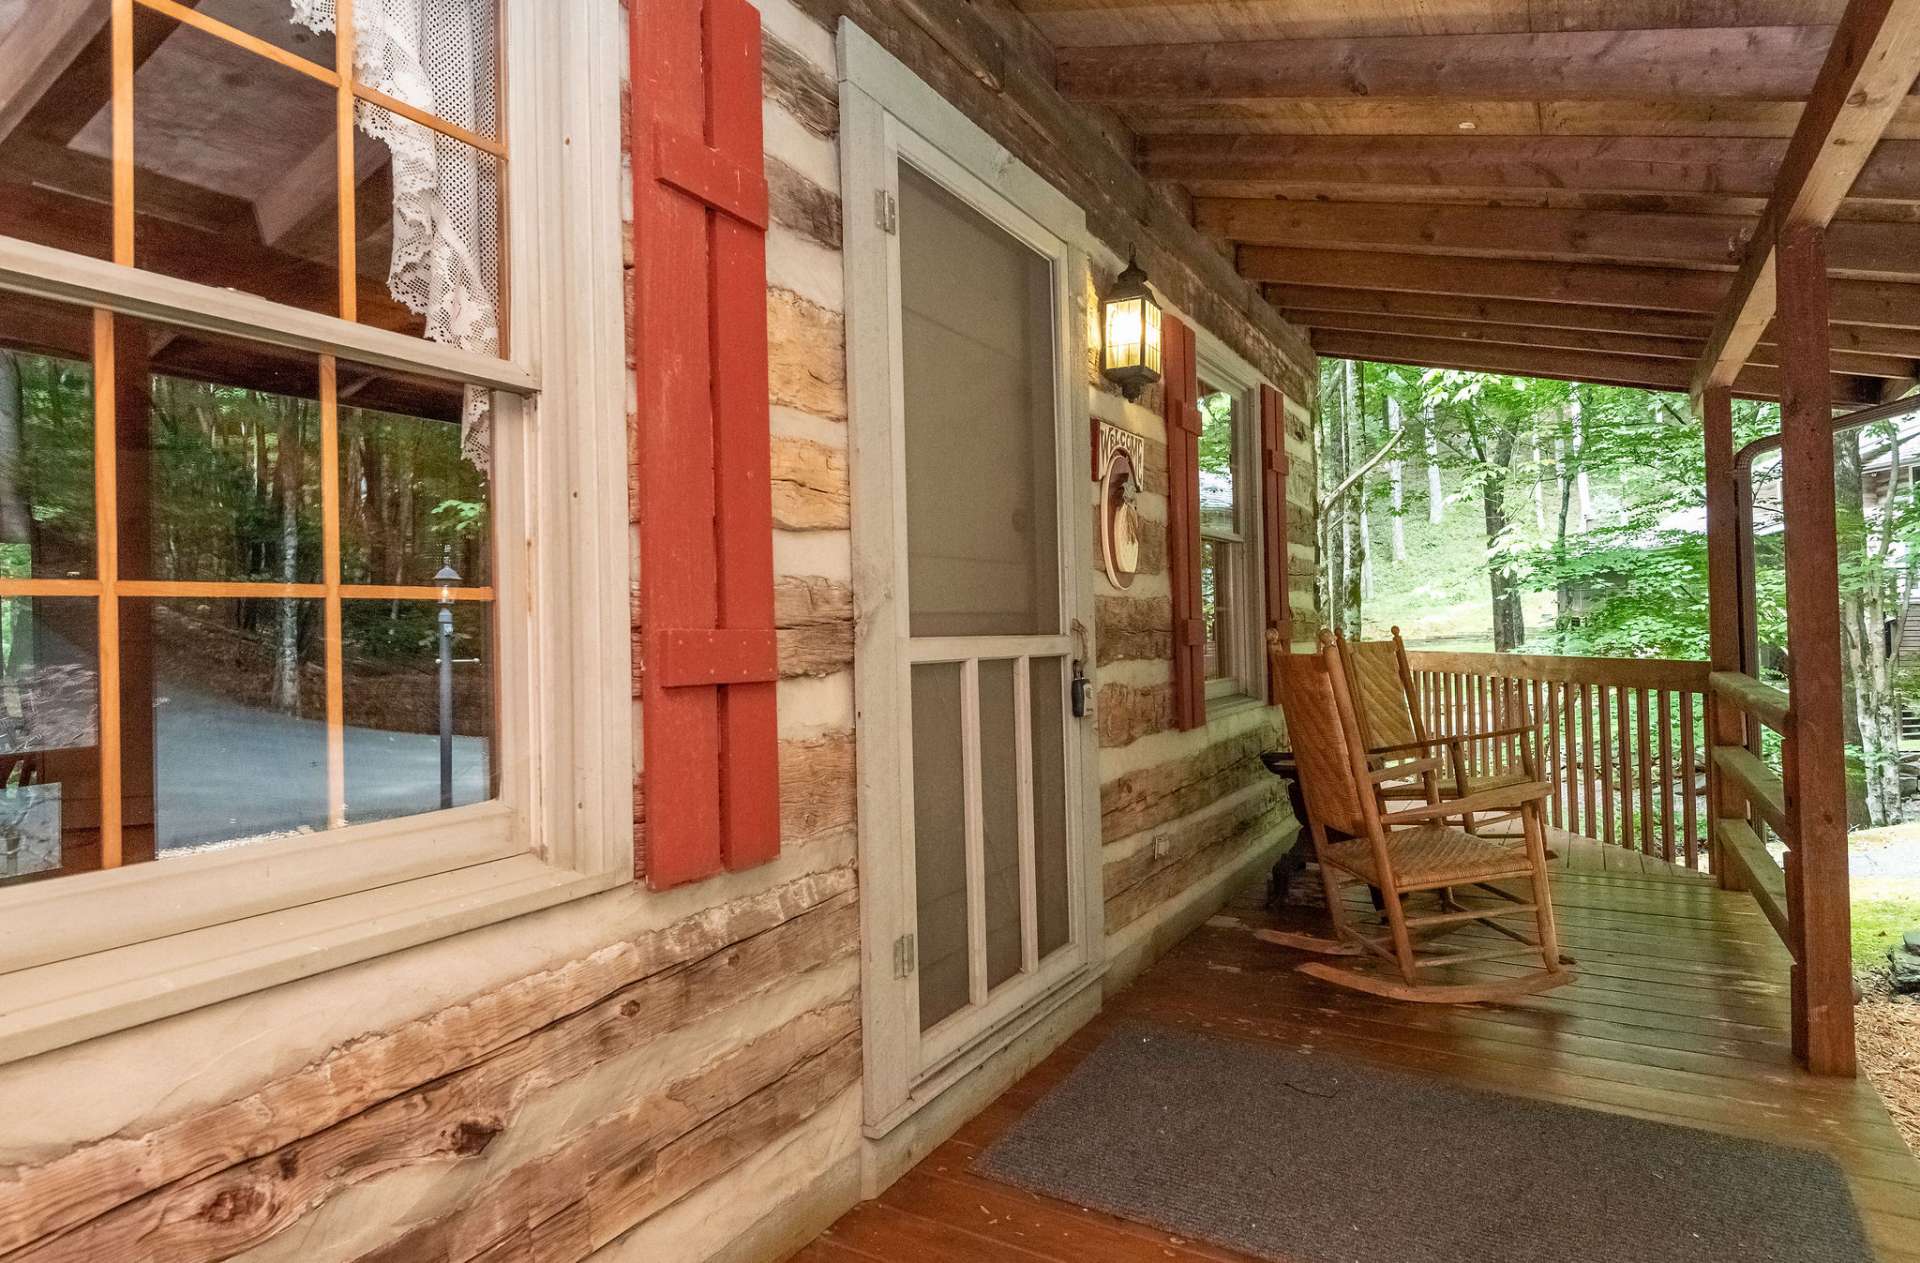 Entry porch is covered and offers an outdoor area to rock away your cares with the calming sounds of the creek.